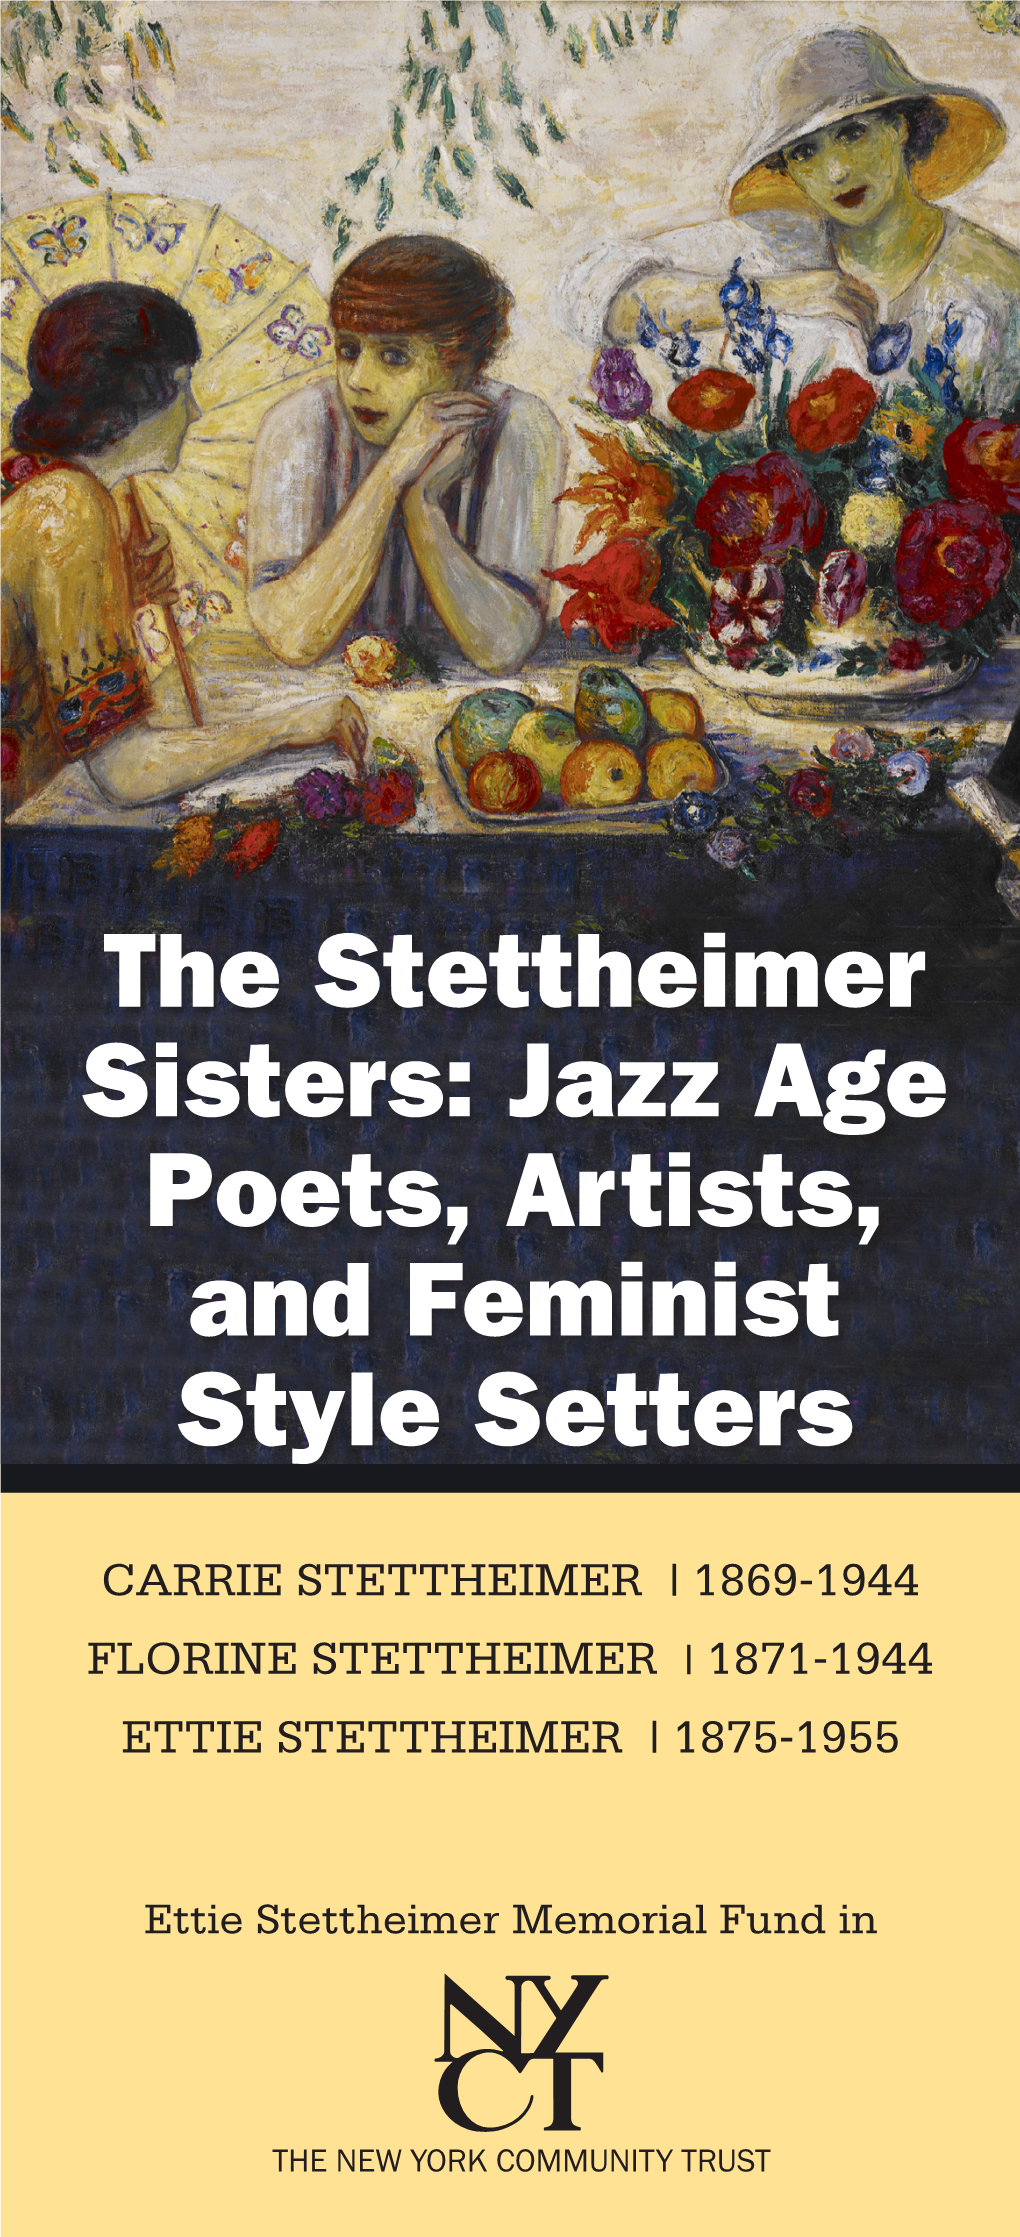 The Stettheimer Sisters: Jazz Age Poets, Artists, and Feminist Style Setters